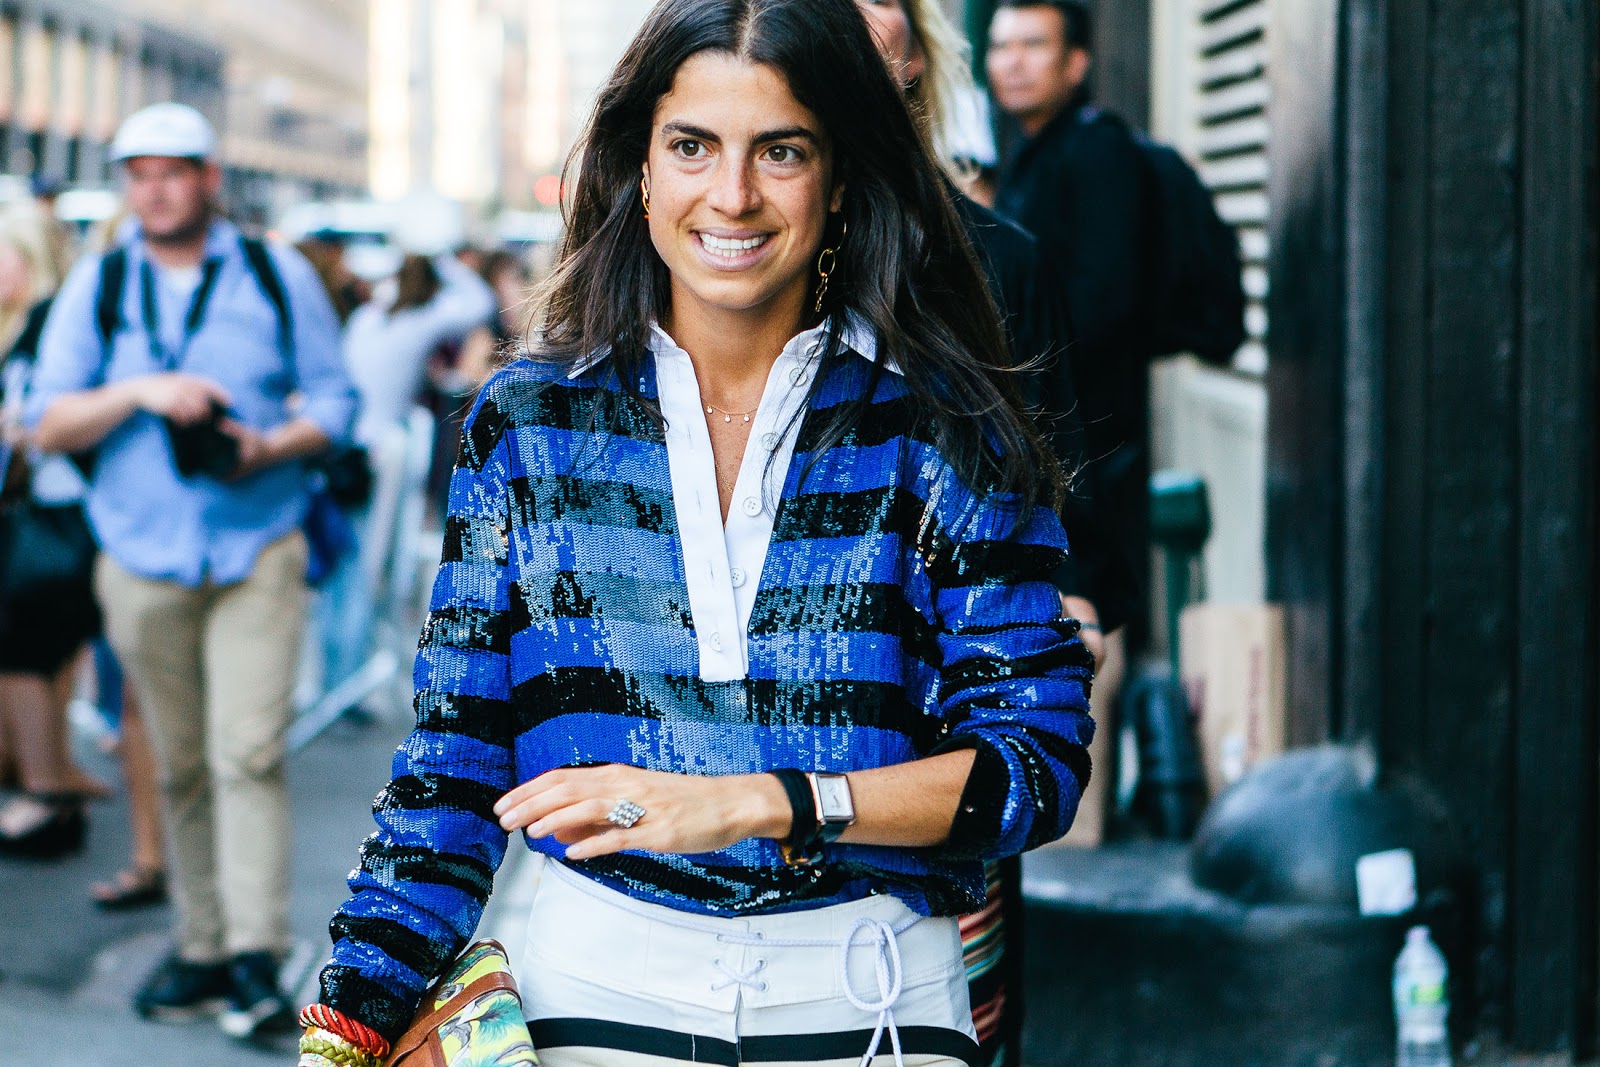 Street Style | The Best Looks from Around the World | Cool Chic Style ...